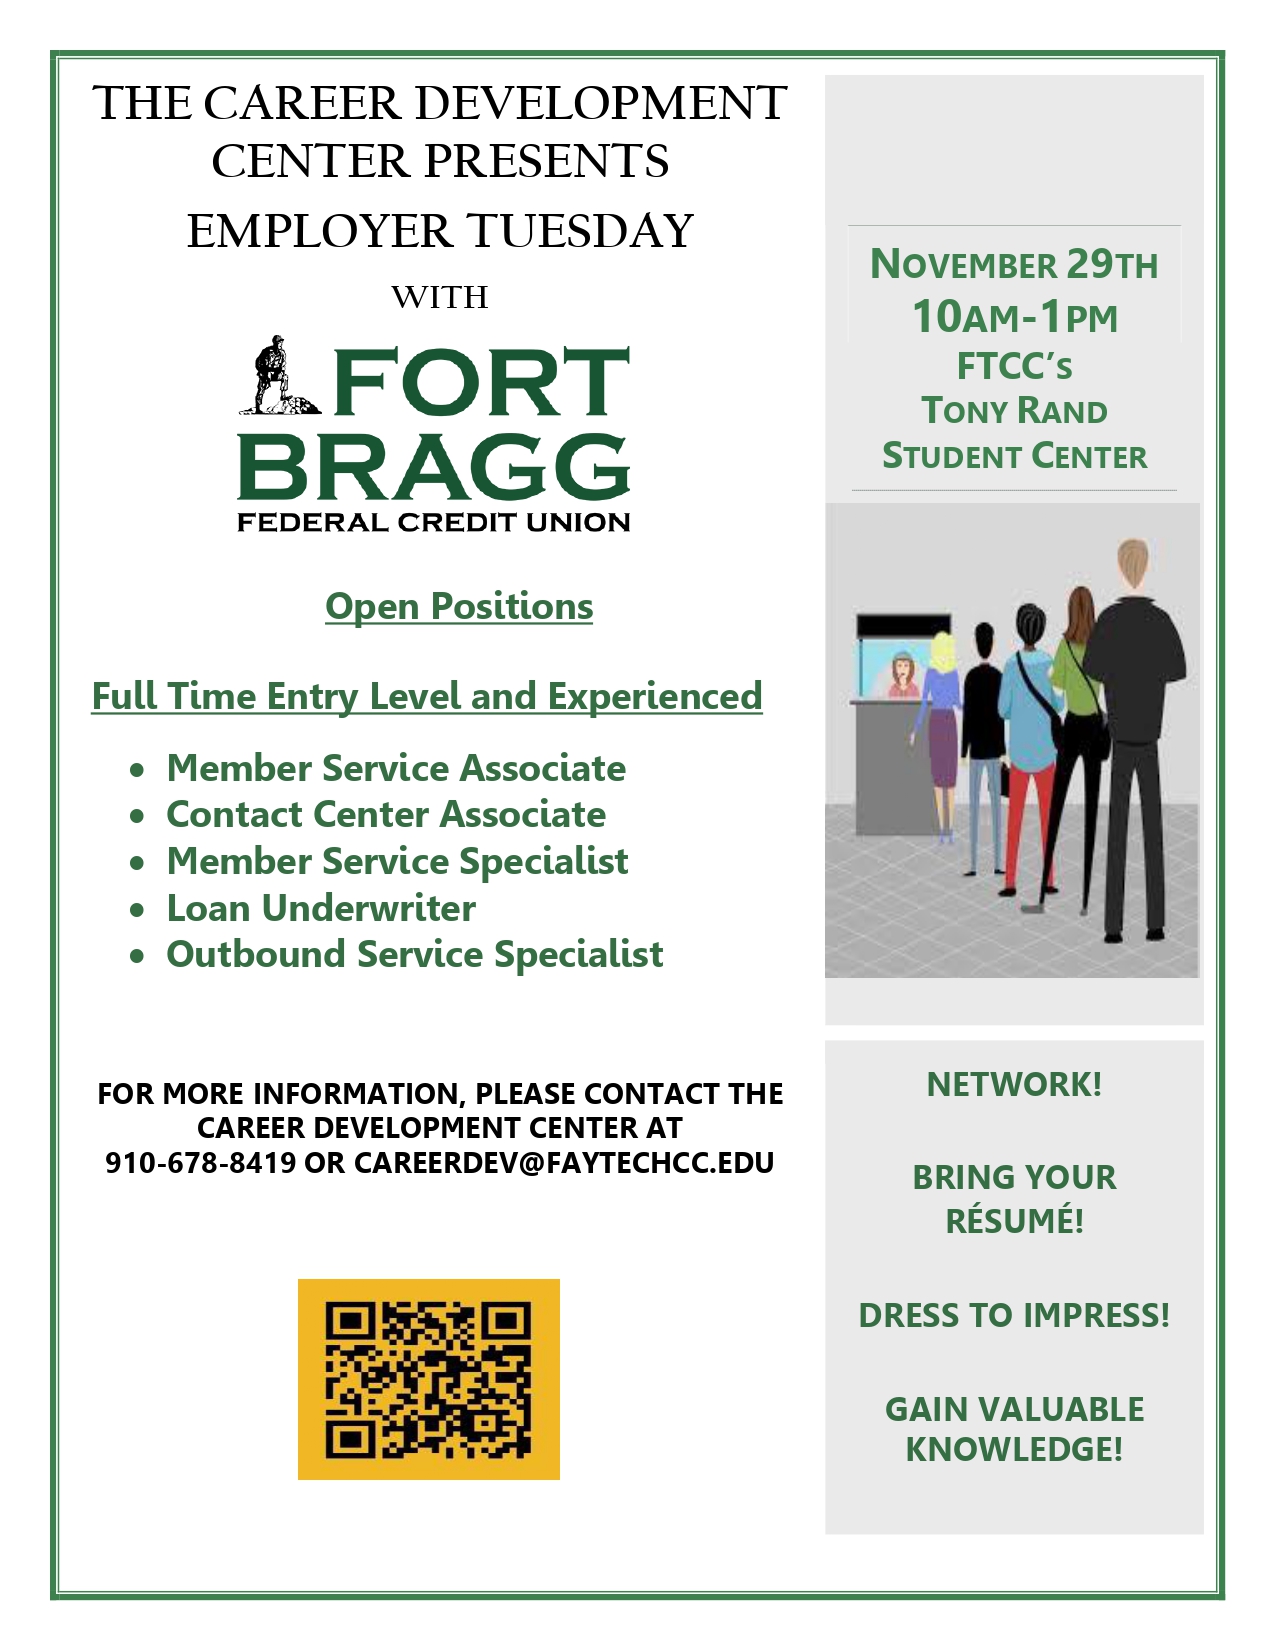 Fort Bragg Federal Credit Union Employer Tuesday